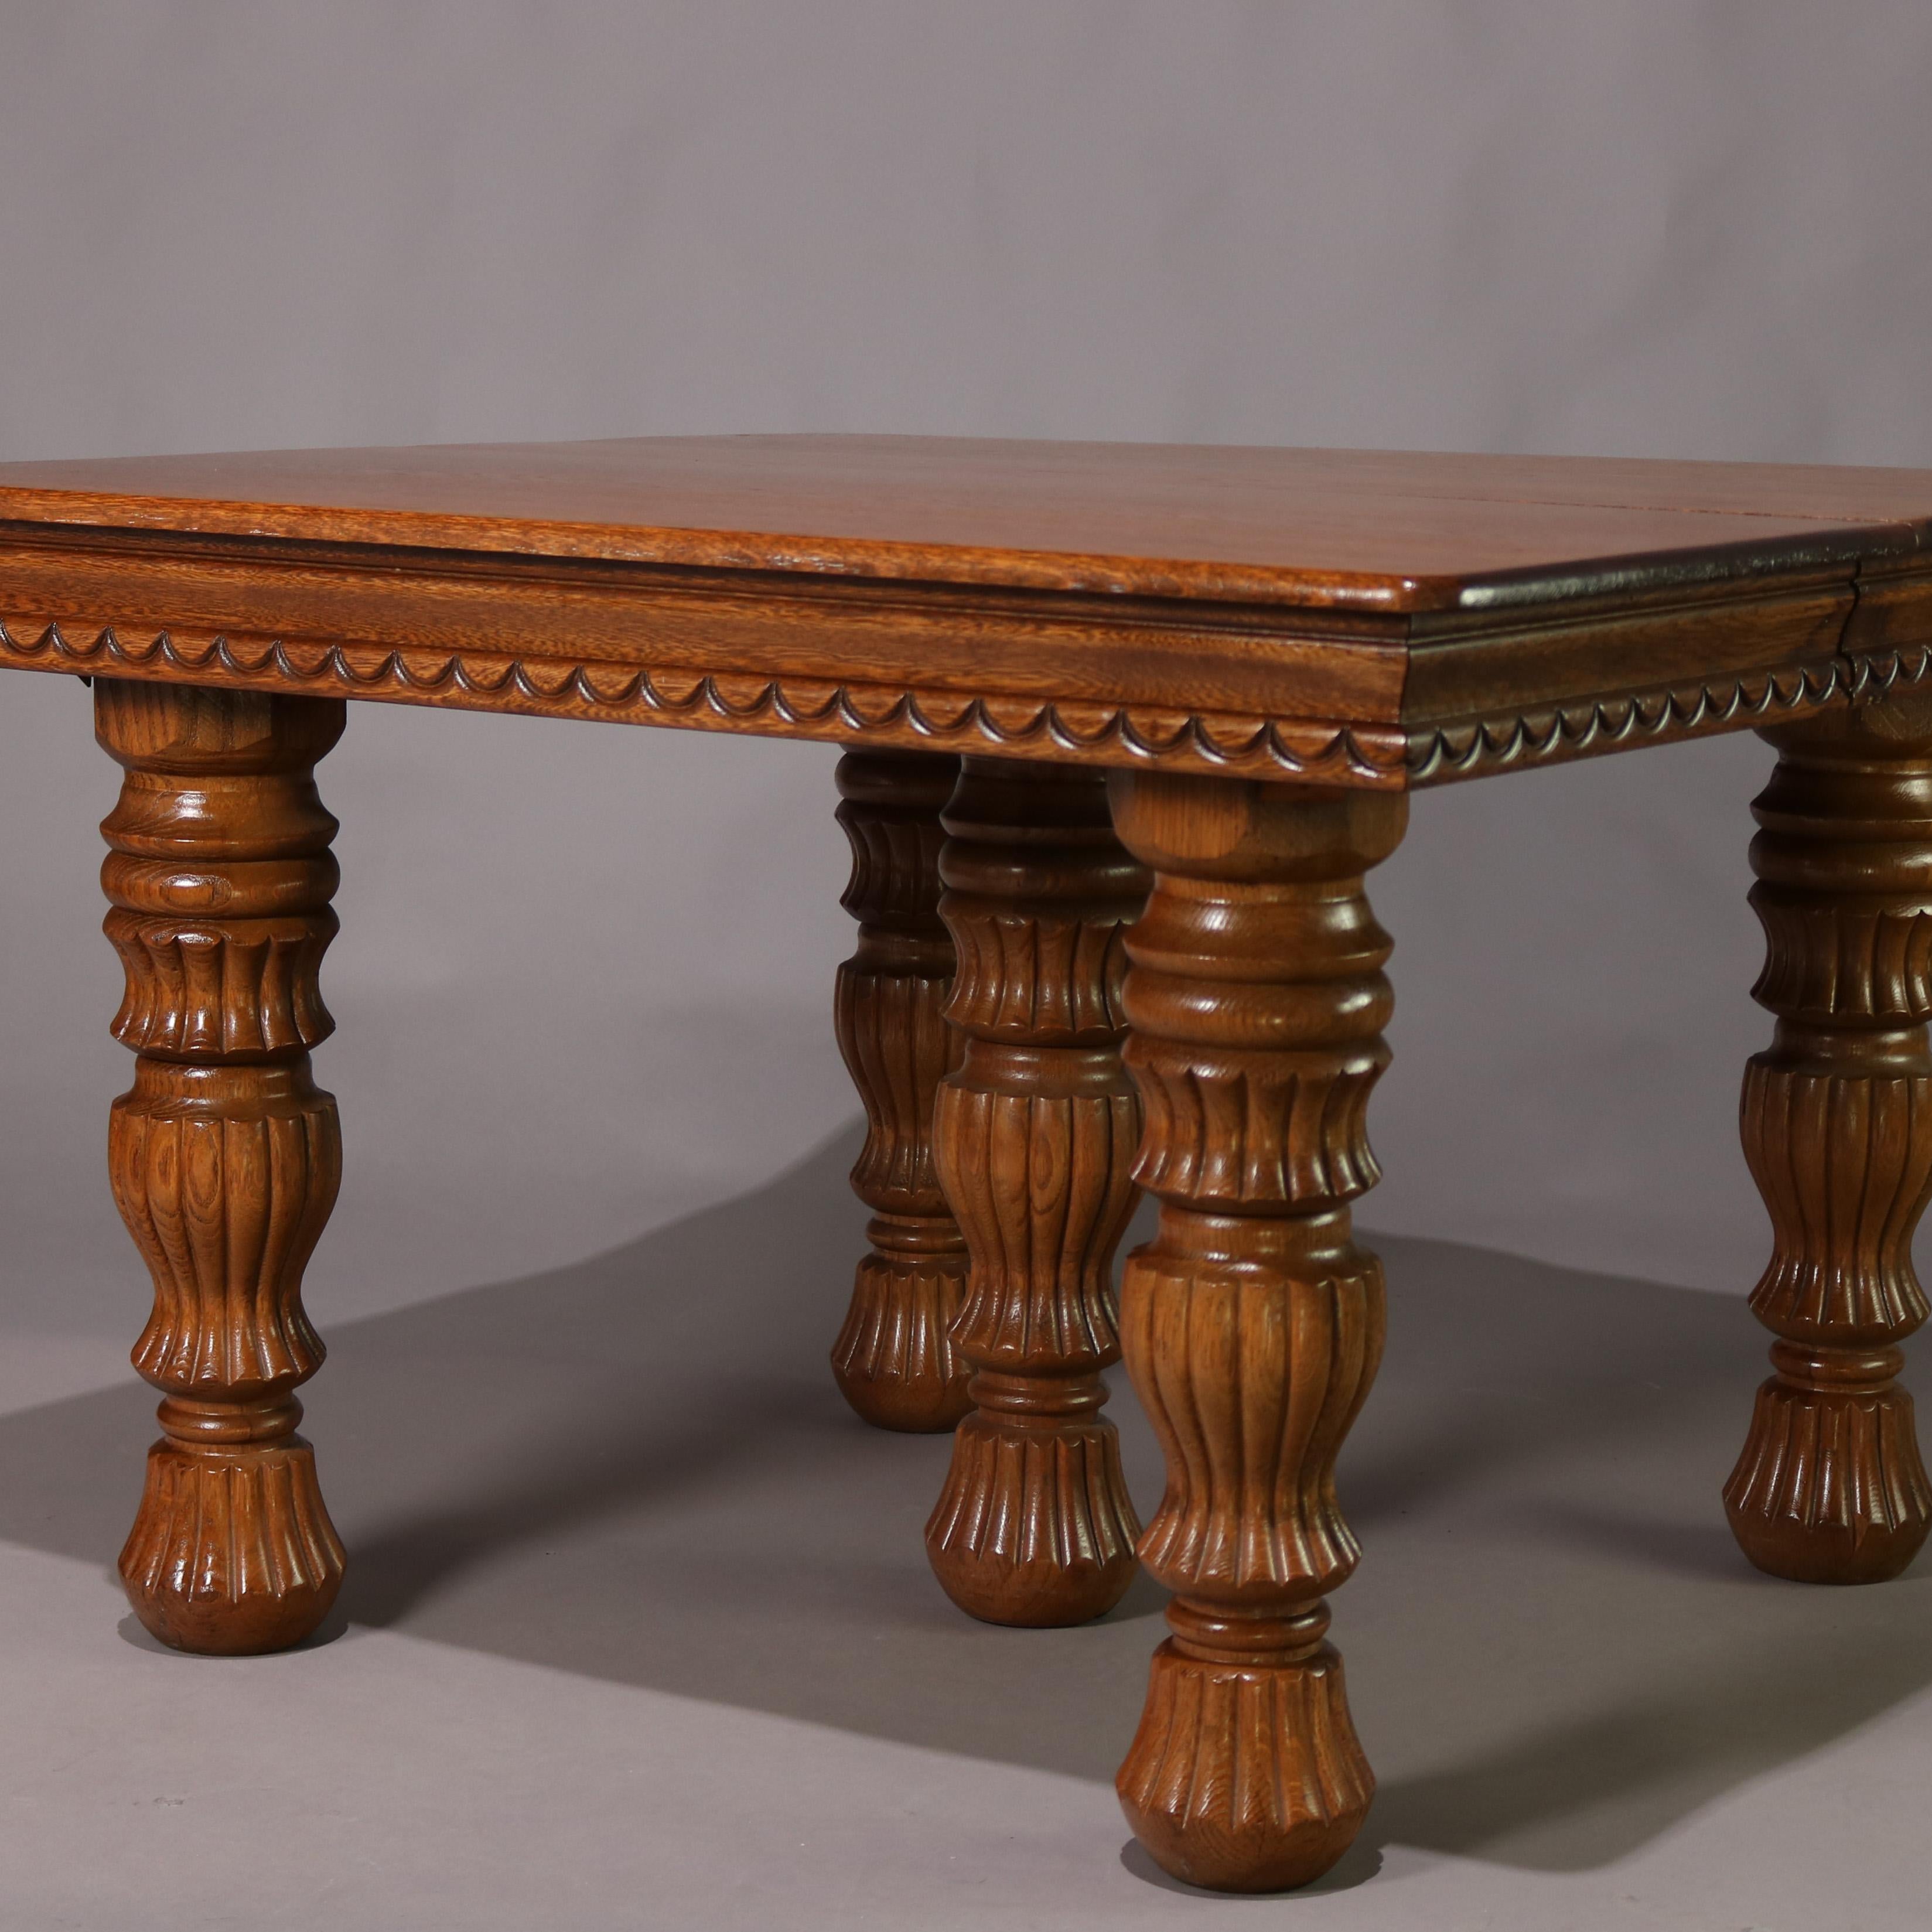 An antique Victorian dining table features quarter sawn oak construction with top surmounting carved skirt and raised on reeded baluster legs, square table extends to include two 10